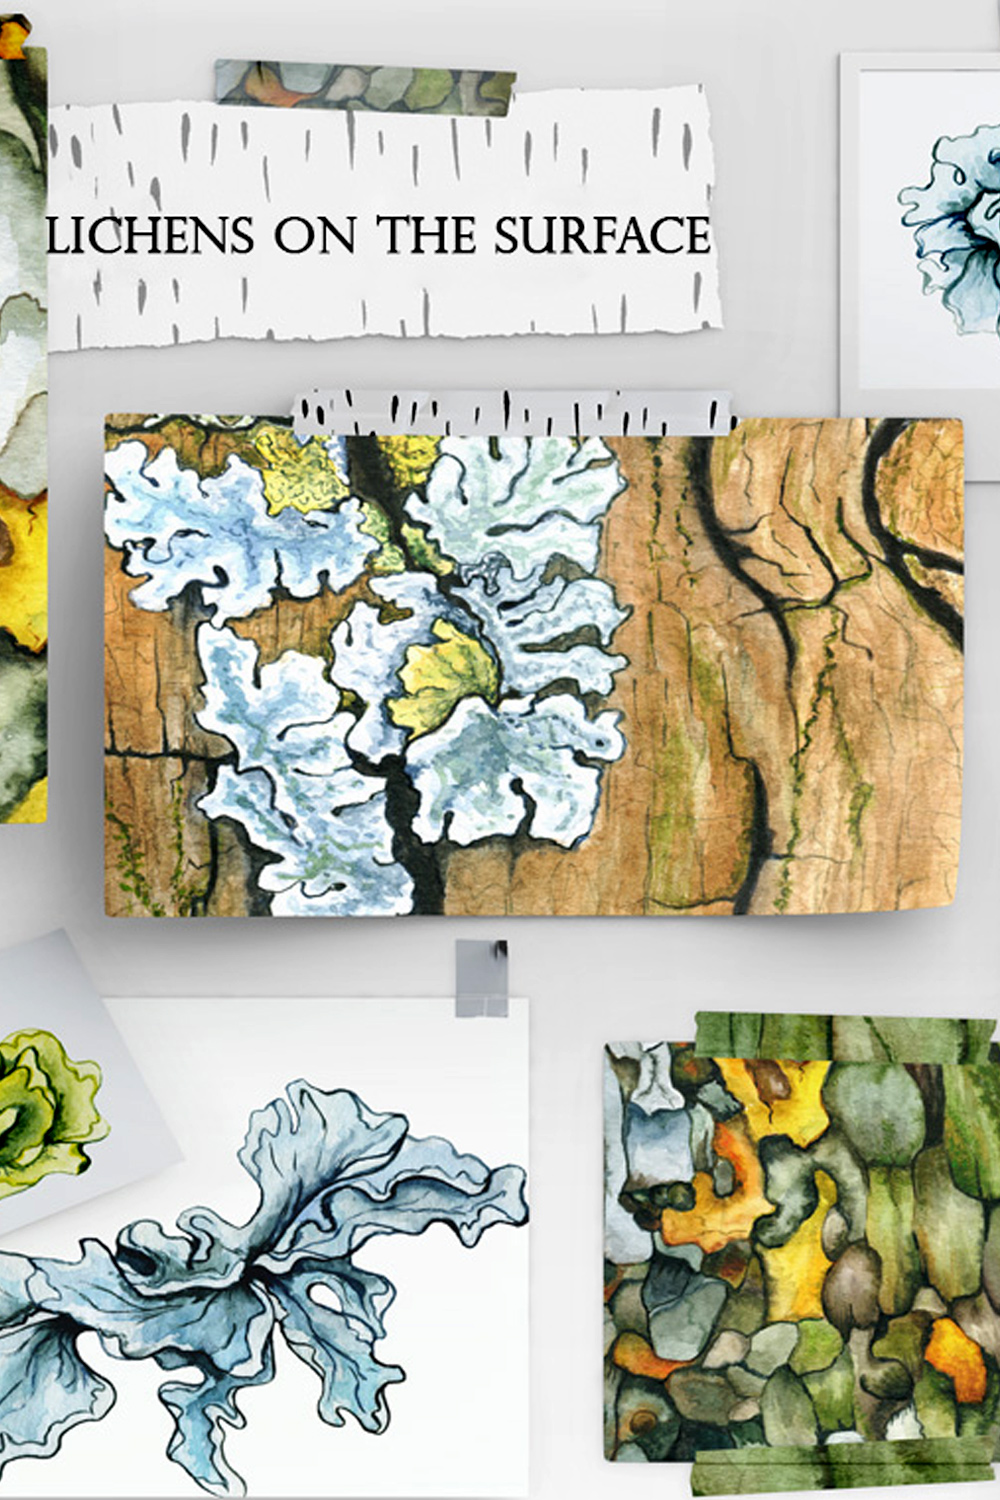 Watercolor Illustrations And Seamless Patterns With Lichens On The Surface Pinterest Image.